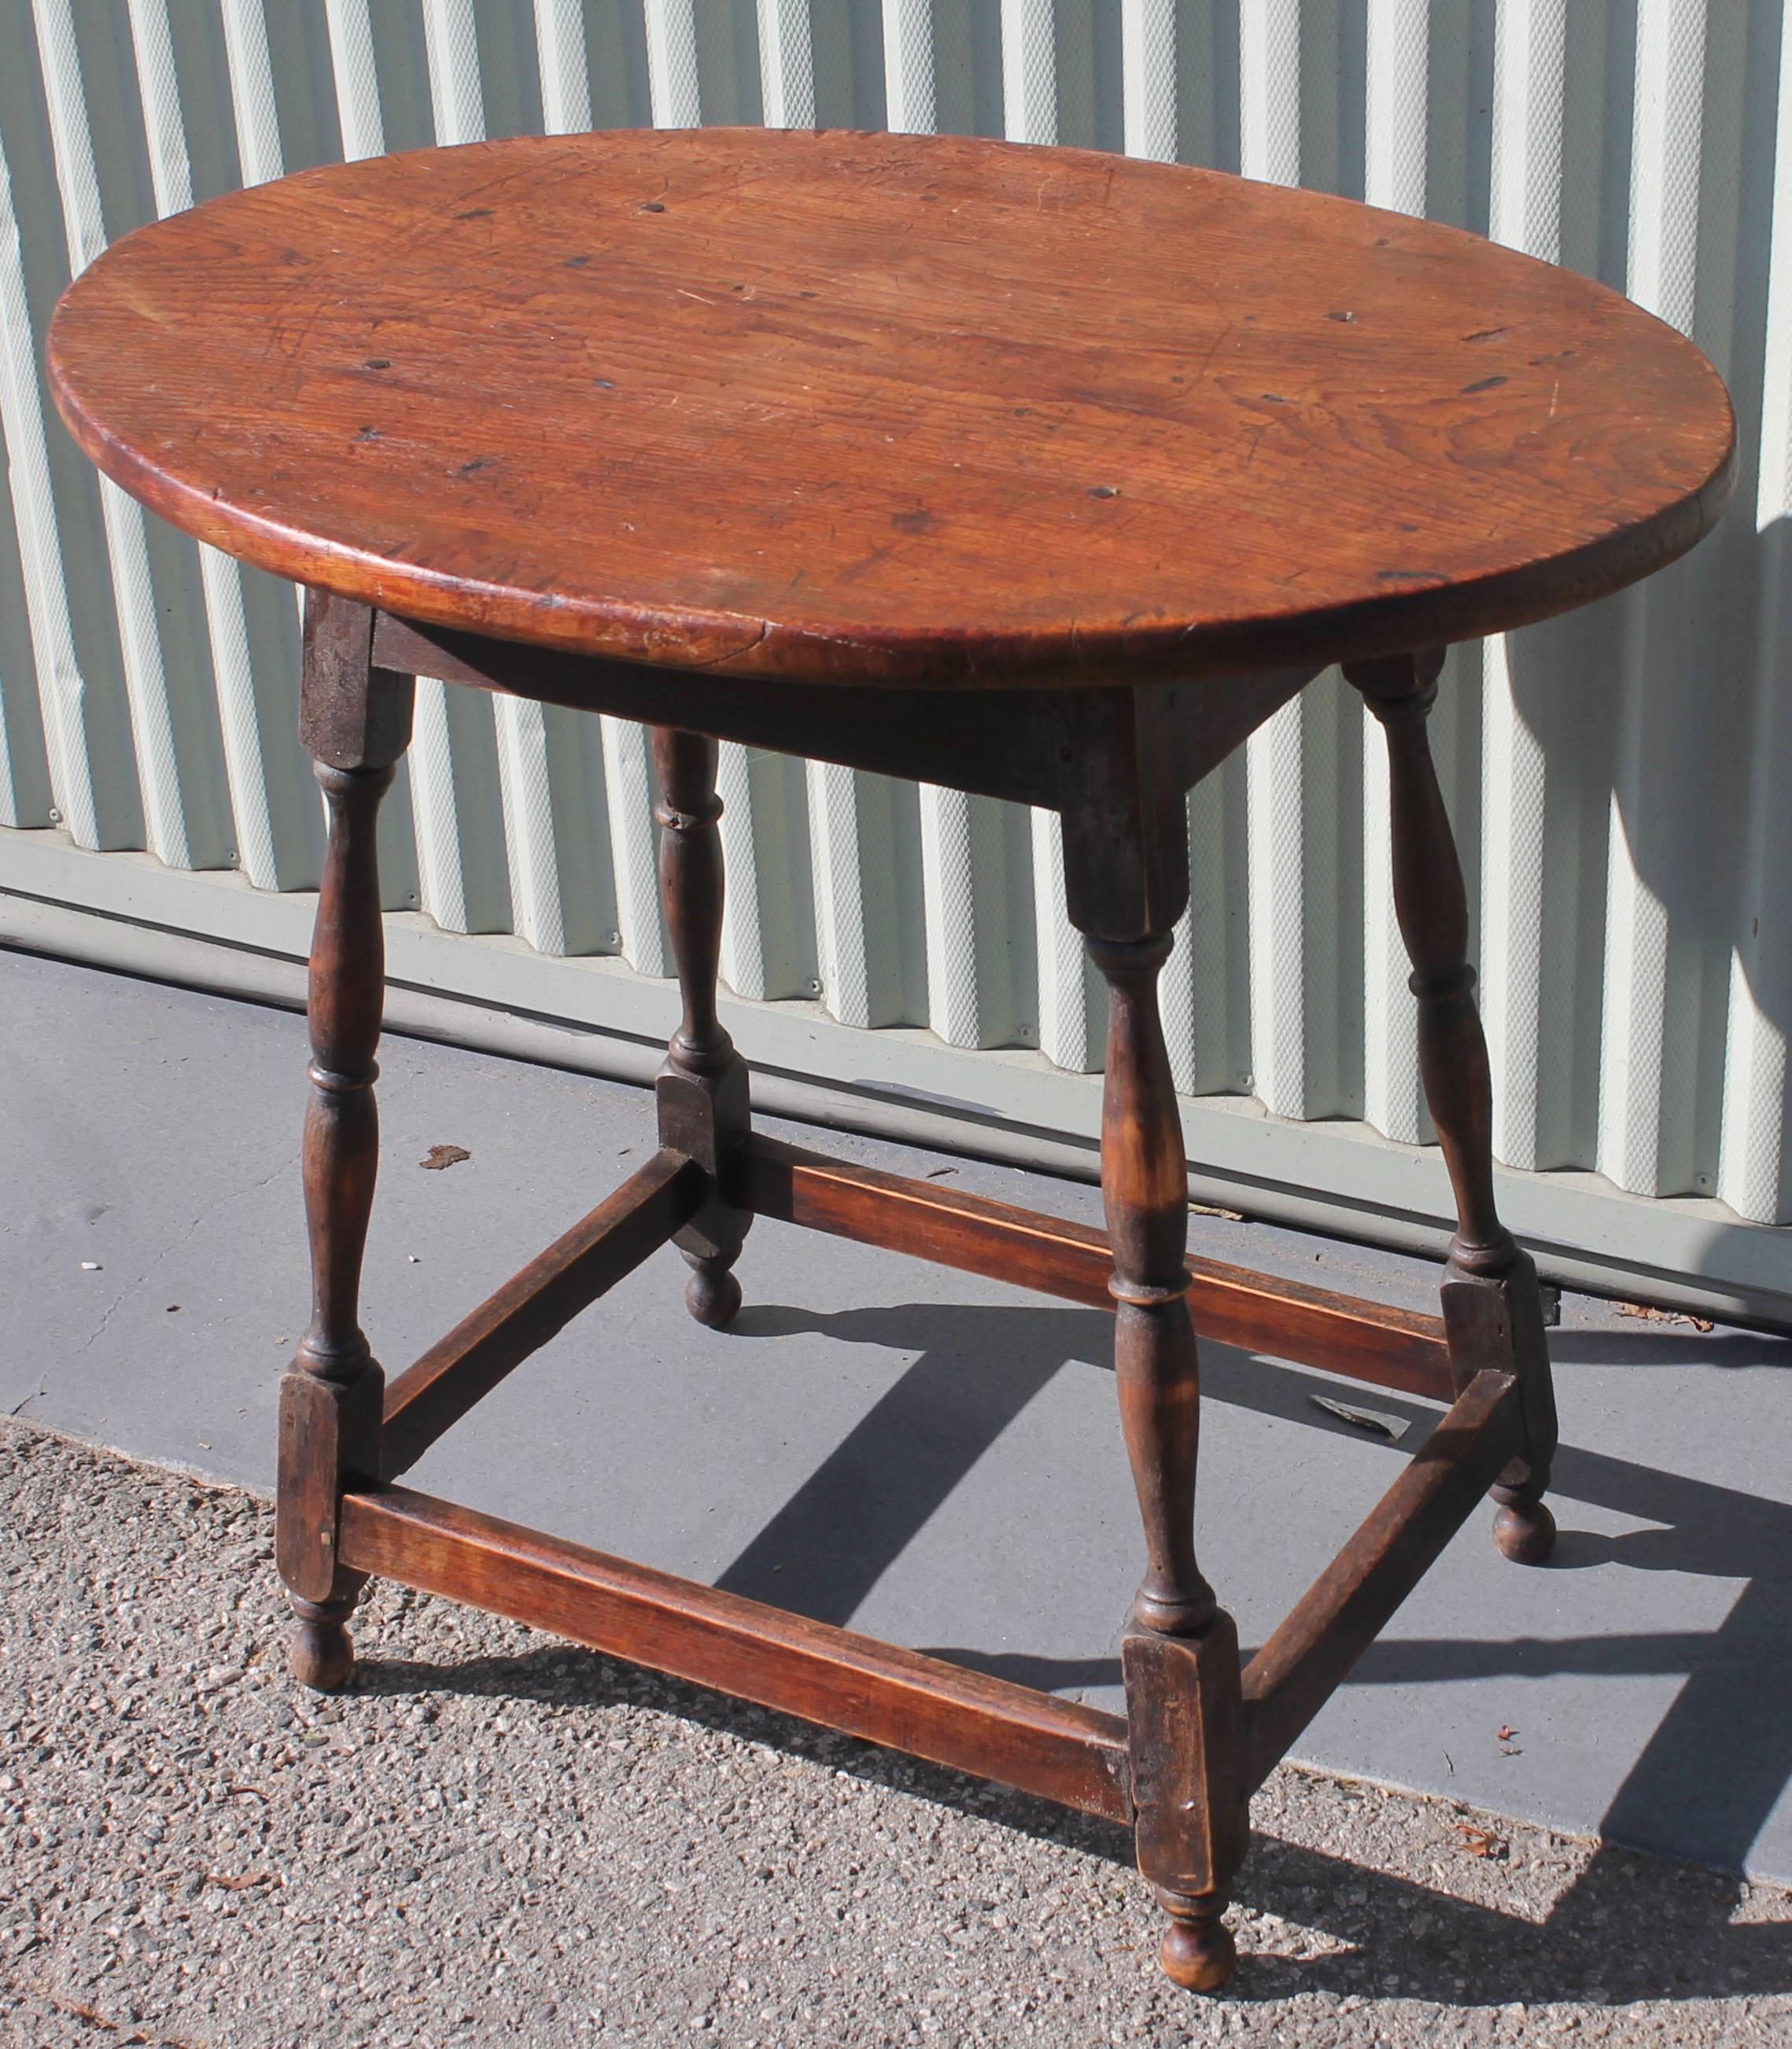 This scrub top side table has a wonderful worn patina and is in great sturdy condition. The top is a dry natural surface. The base is a worn brown painted surface.